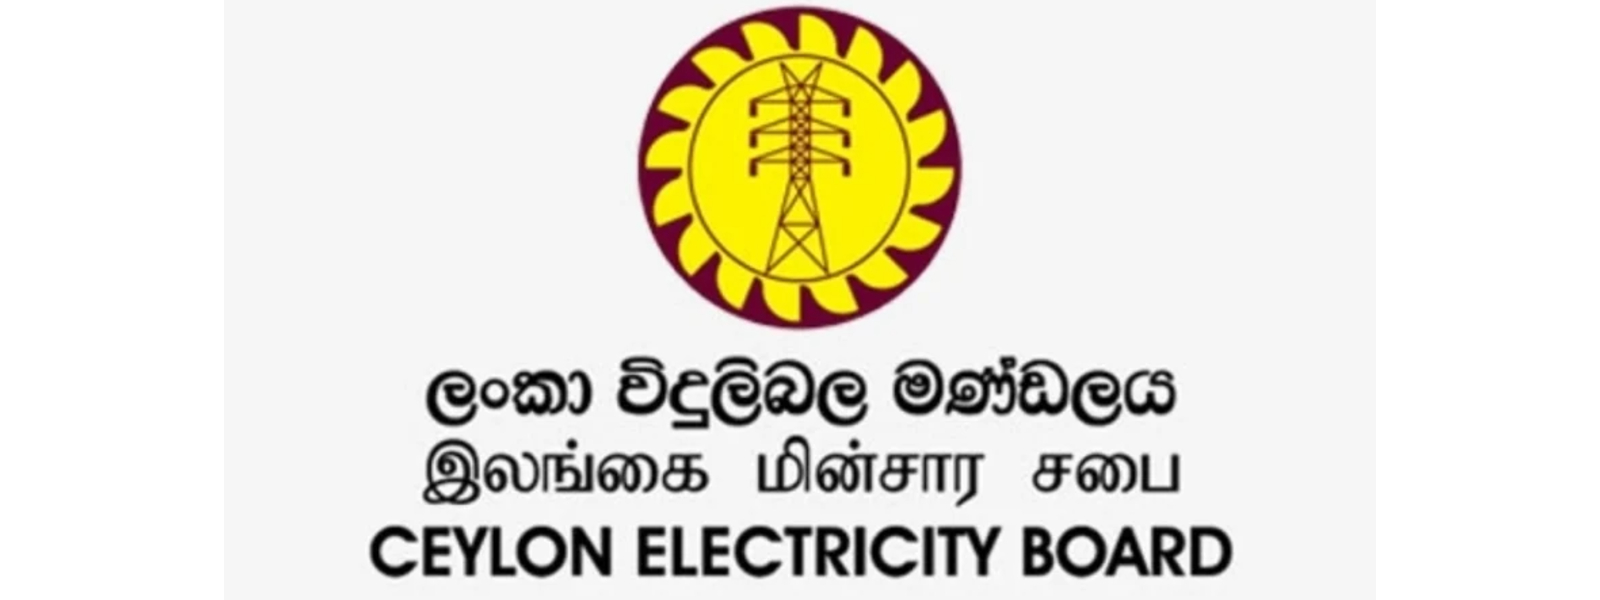 Construction of Sri Lanka’s largest wind power plant, concludes: CEB